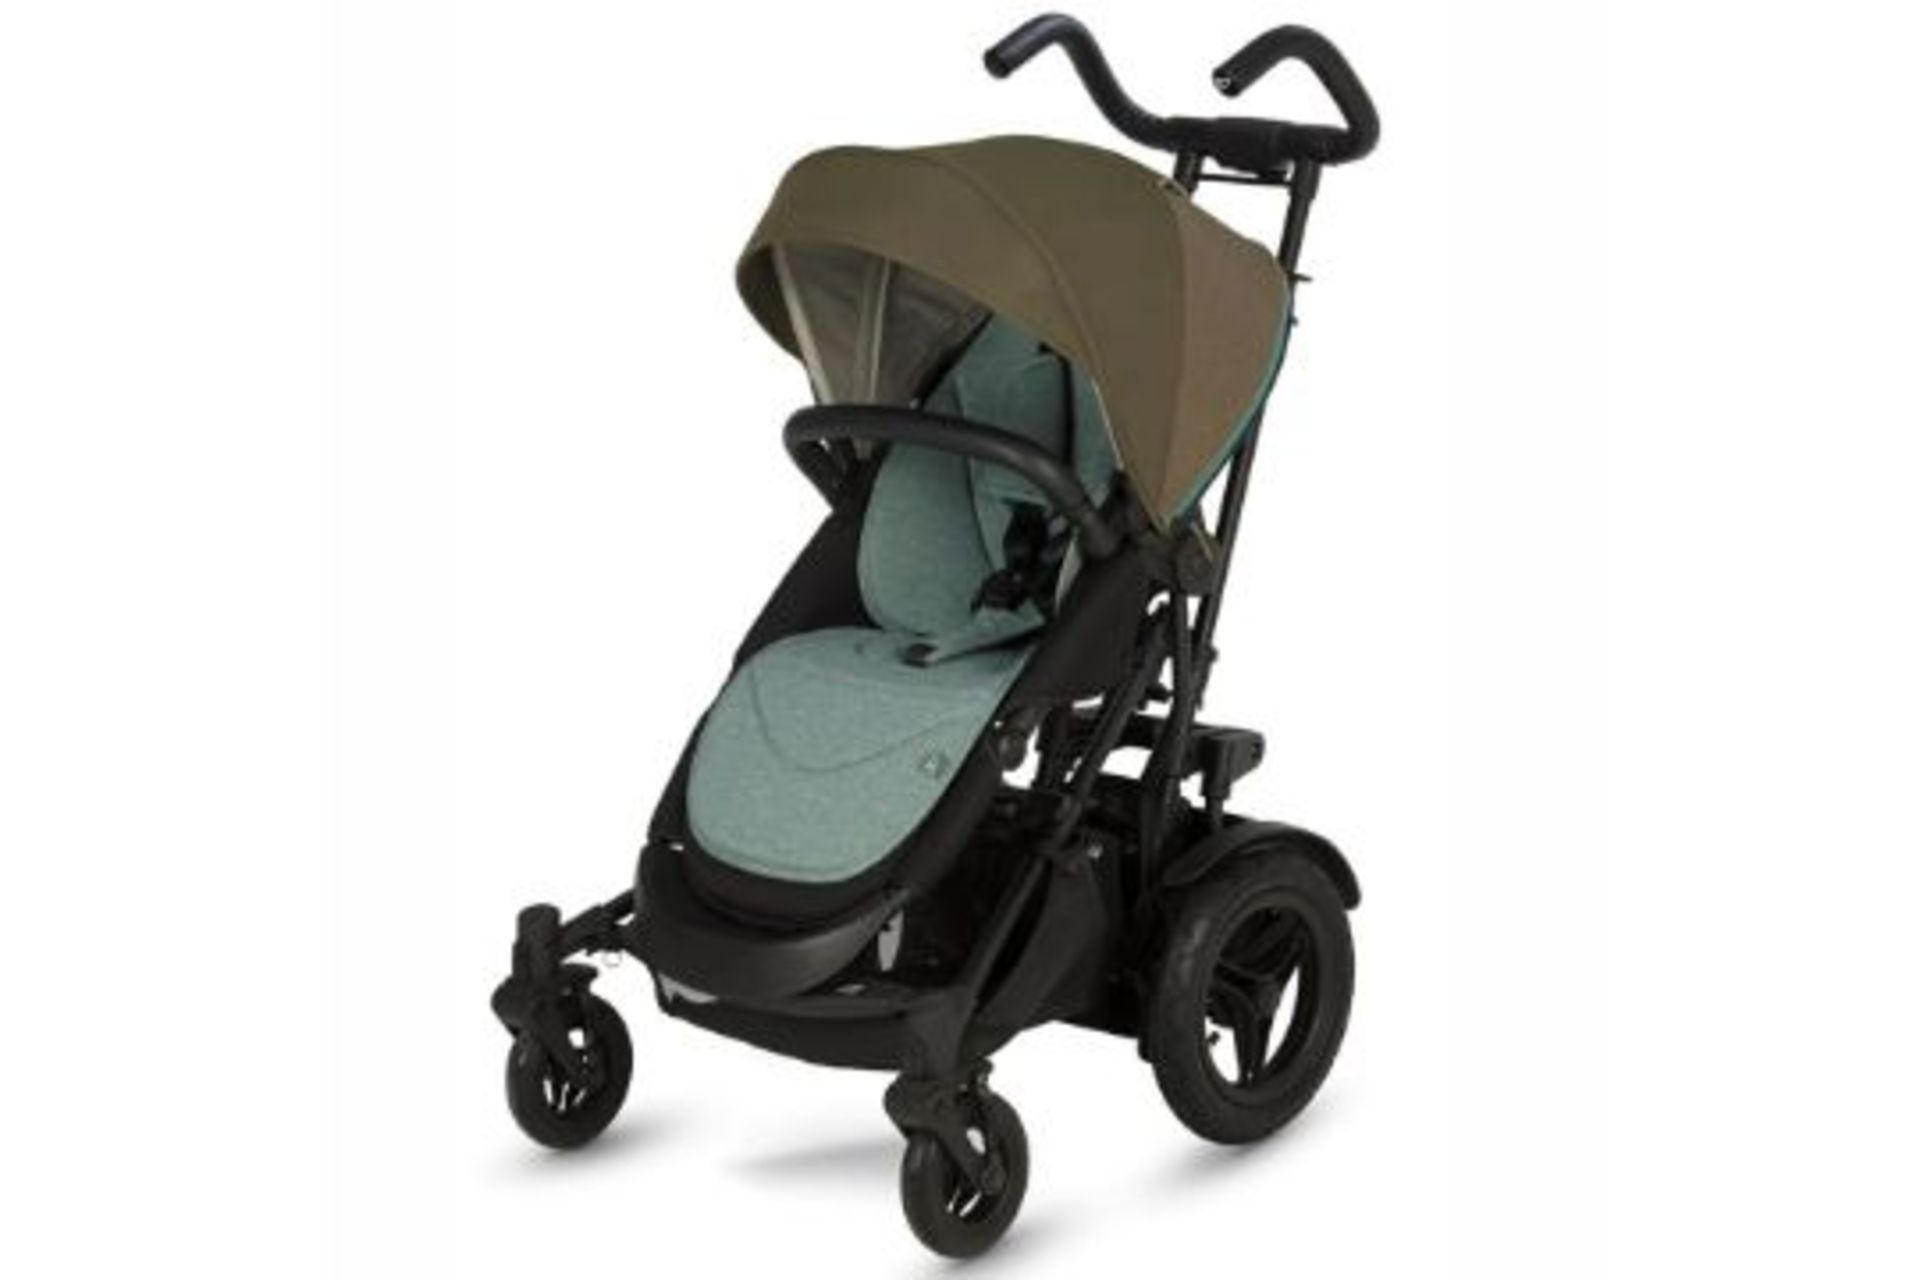 New & Boxed Micralite by Silver Cross TwoFold Pushchair – Evergreen. Suitable from 6 Months to 4